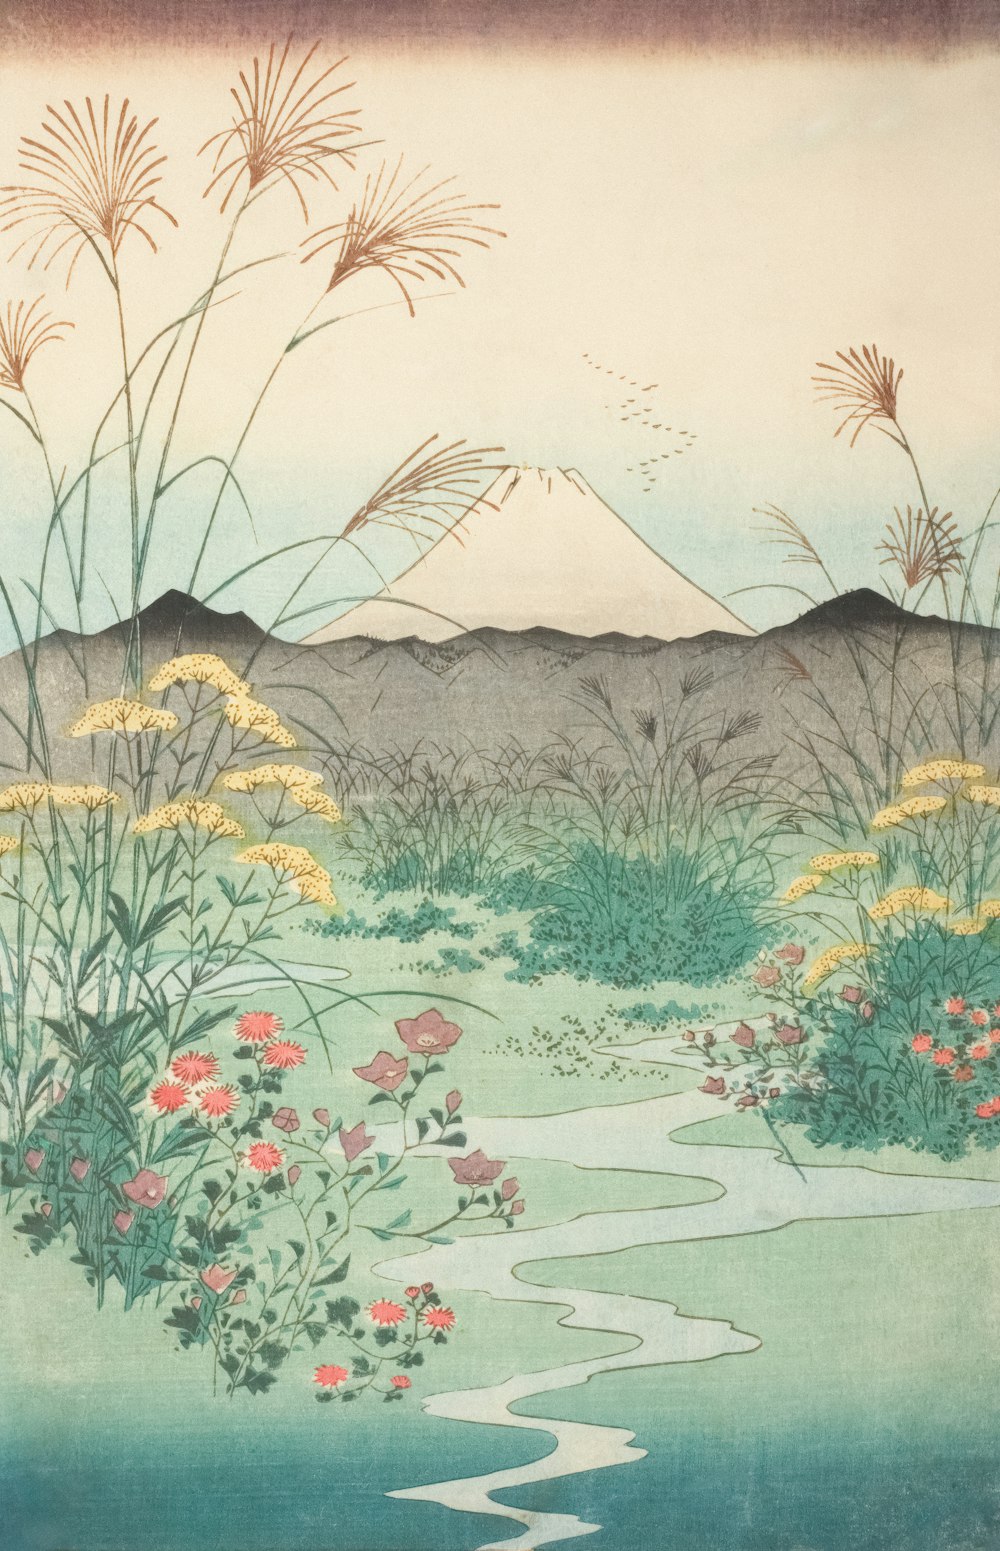 a painting of flowers and a mountain in the background